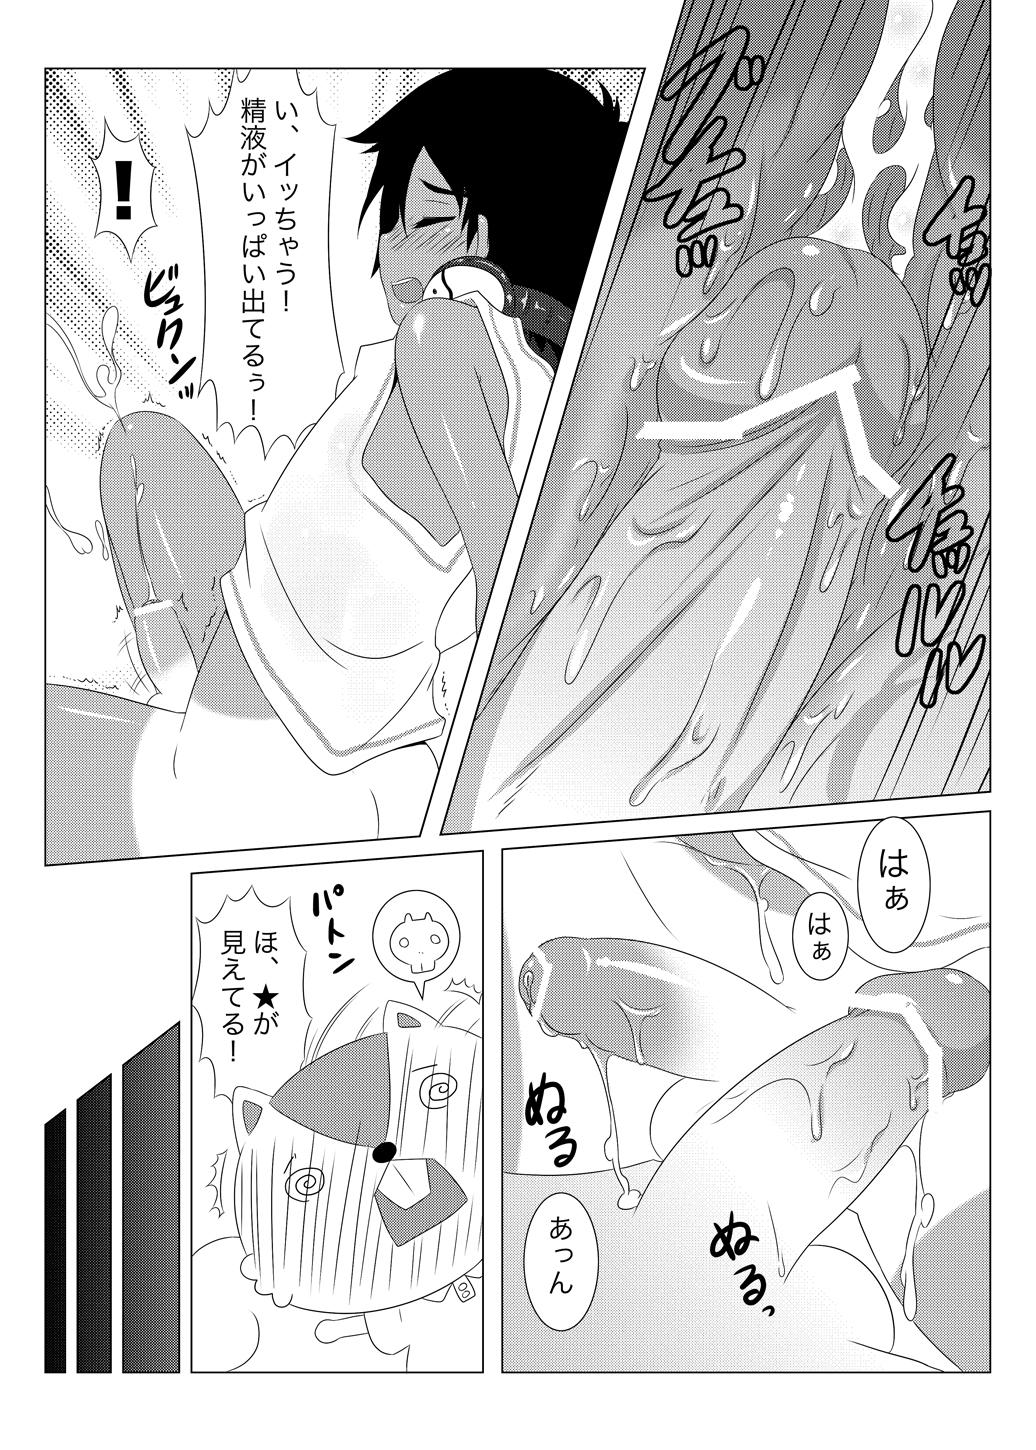 Thai Another Summer 2 - Summer wars Amateur Sex - Page 12